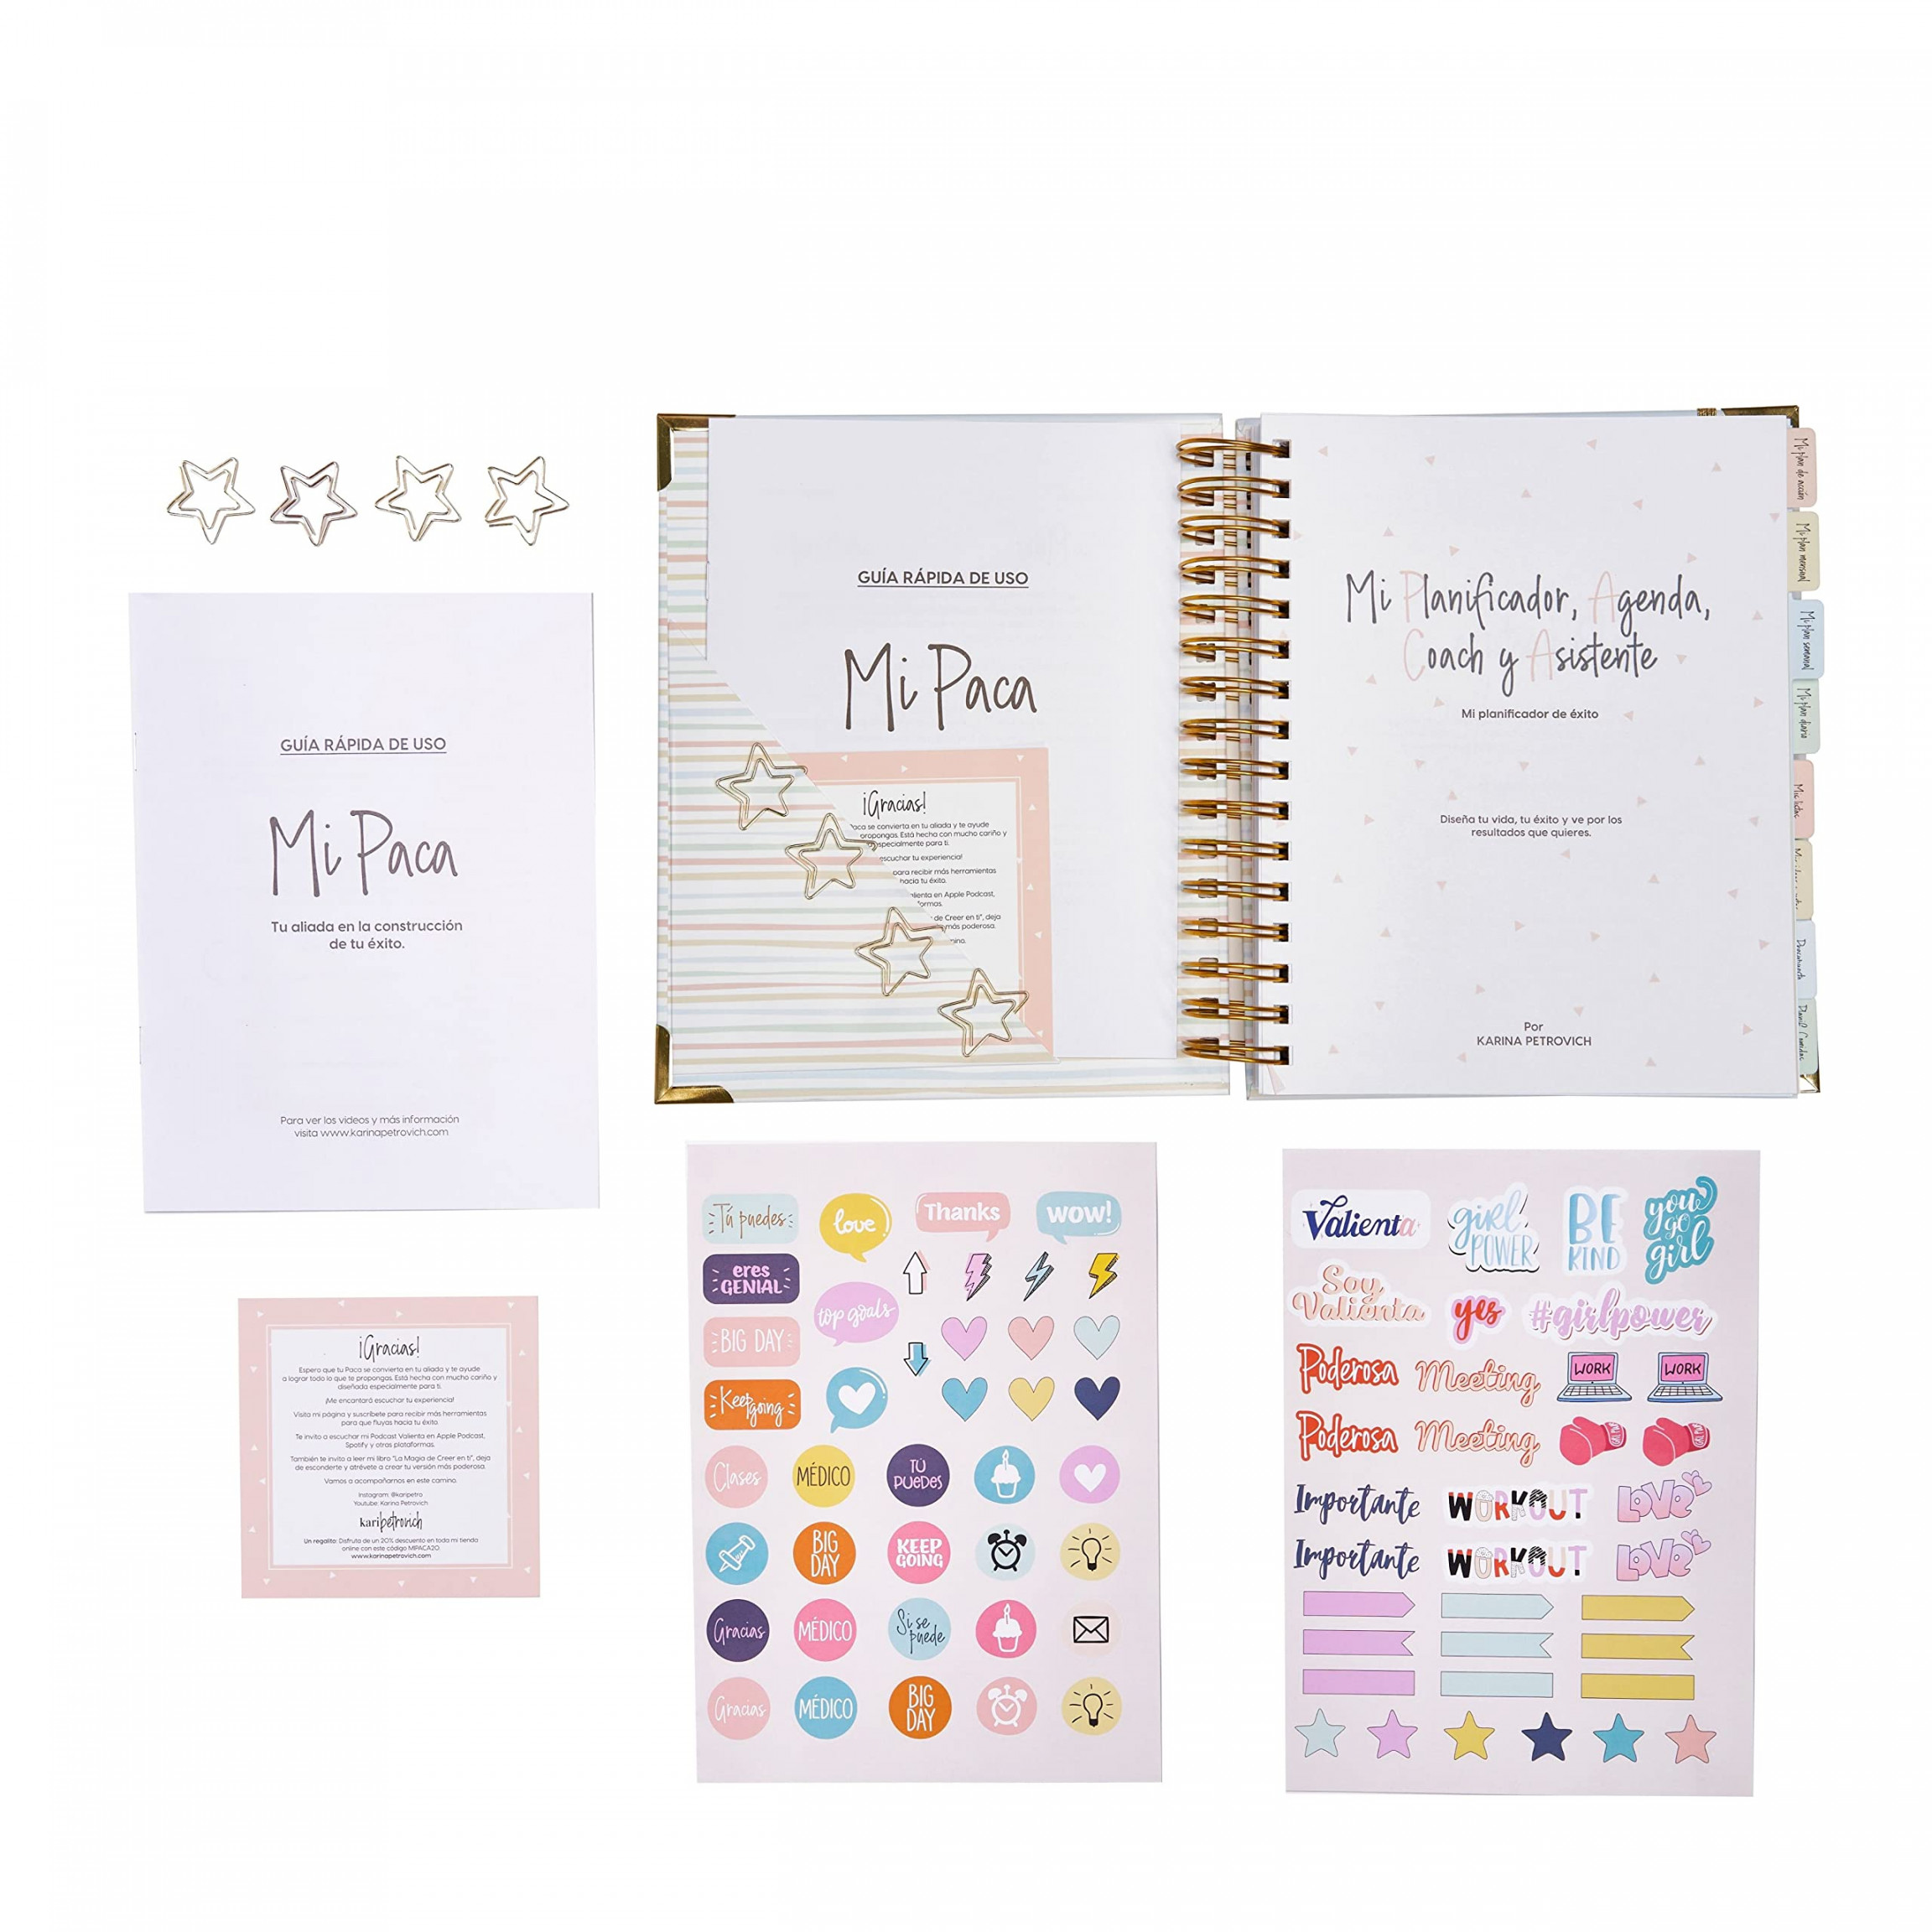 Mi Paca Spanish Planner  Best Mothers Day Gifts Spanish - Abuela Gifts  in Spanish - Undated AgenSee more Mi Paca Spanish Planner  Best